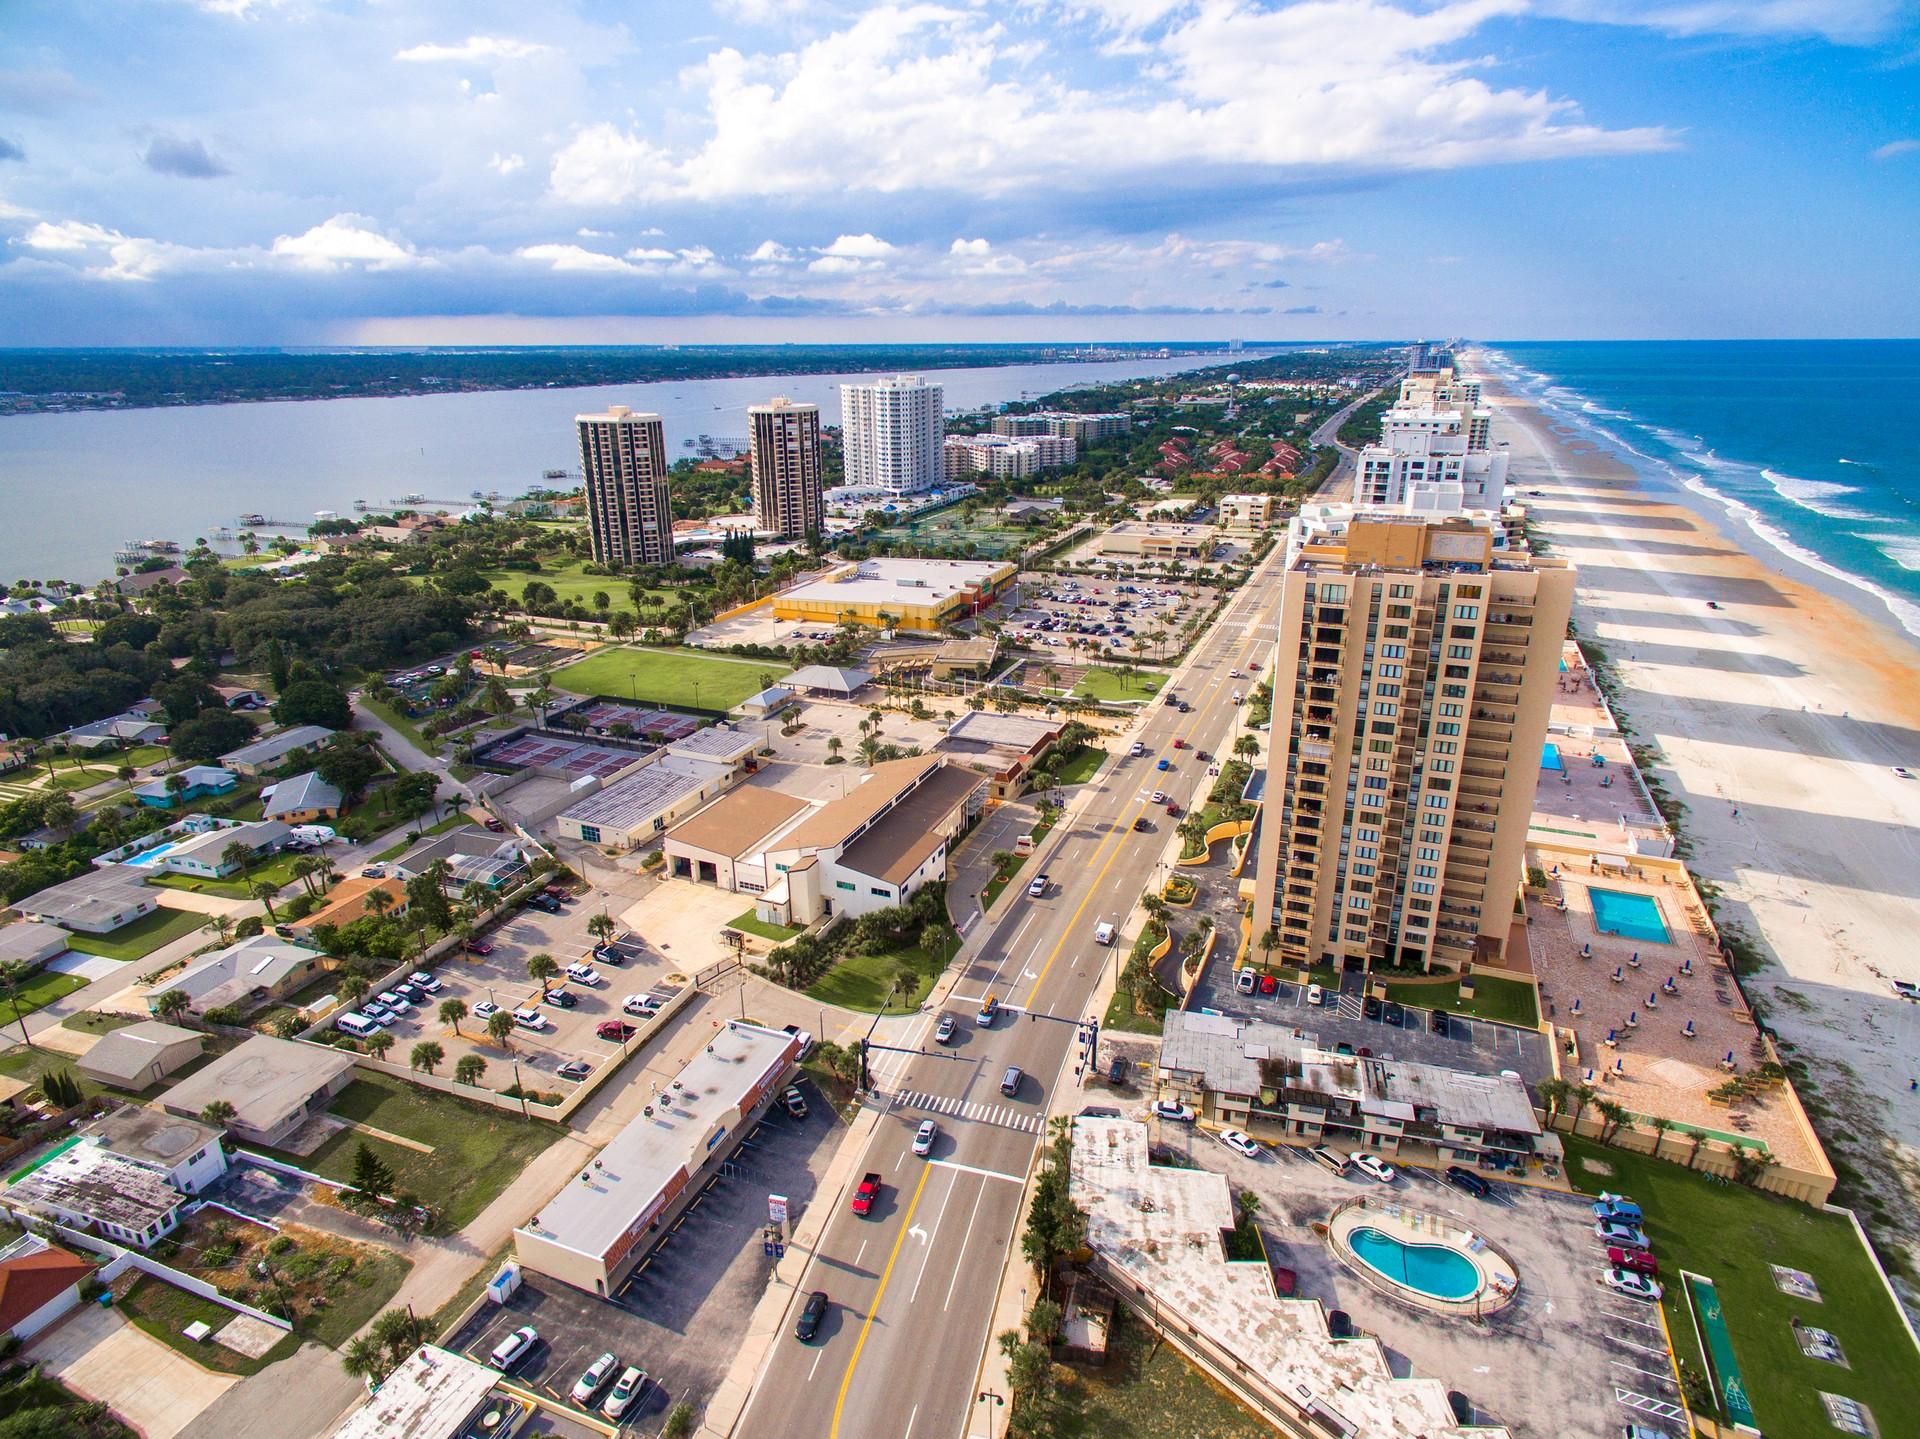 Aerial view of architecture in Daytona Beach with cloudy sky